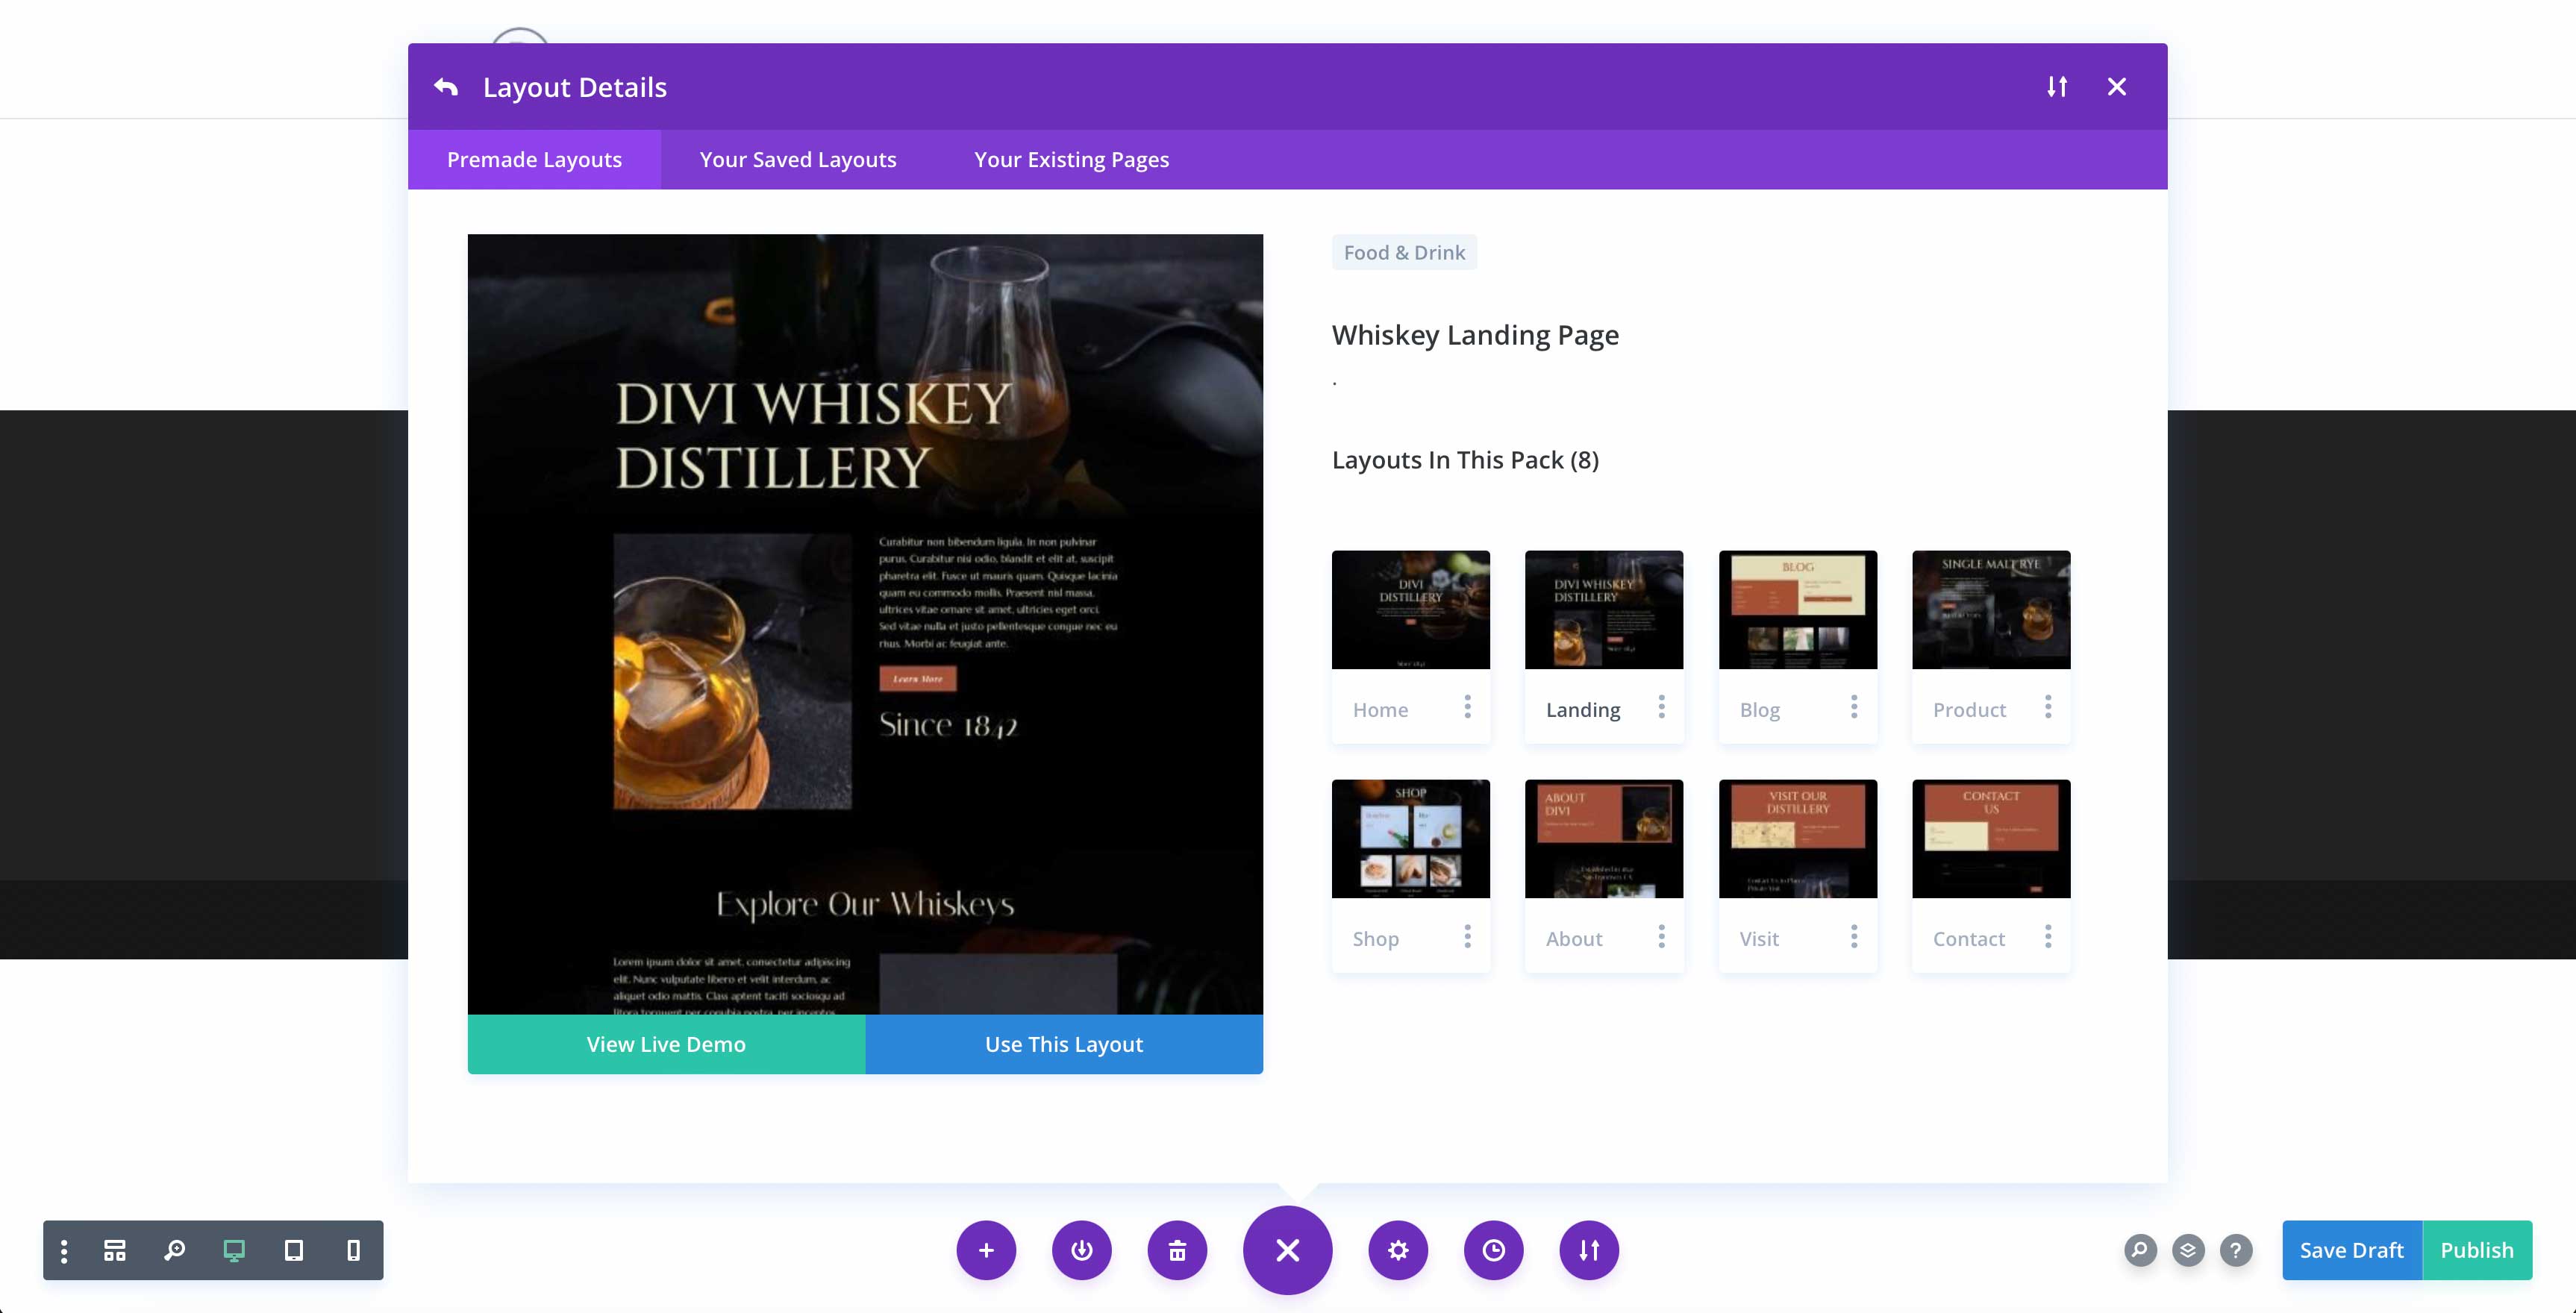 Whiskey-Distillery-Layout-Pack Get a Free Whiskey Distillery Layout Pack for Divi